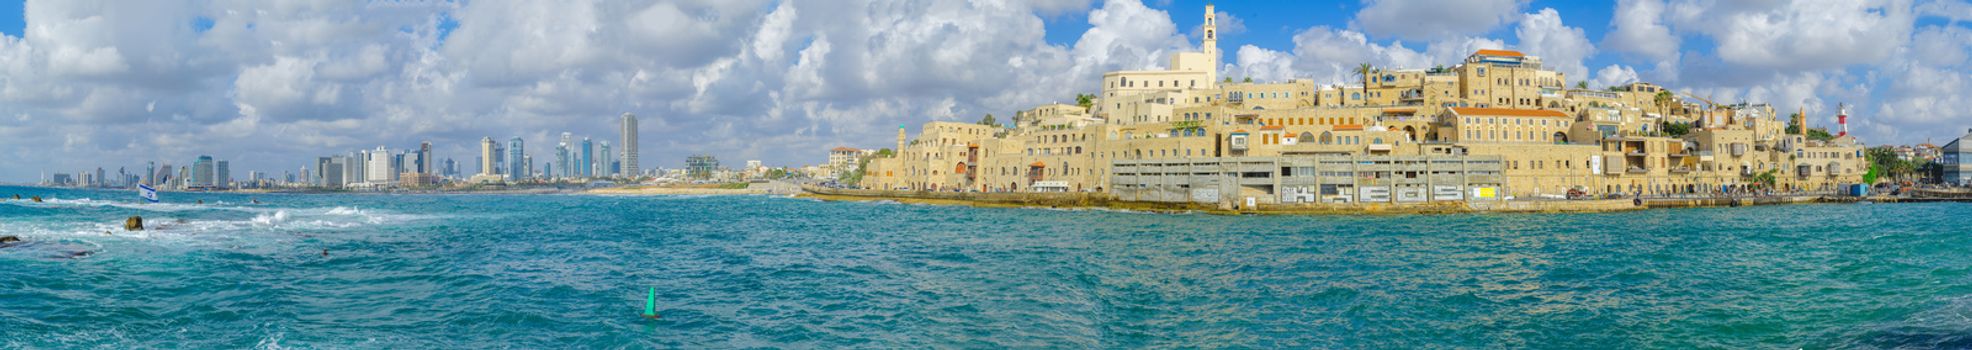 TEL-AVIV, ISRAEL - MAY 27, 2016: Panoramic view of the Jaffa port, the old city of Jaffa, and Tel-Aviv coastal skyline, with locals and visitors, now part of Tel-Aviv Yafo, Israel